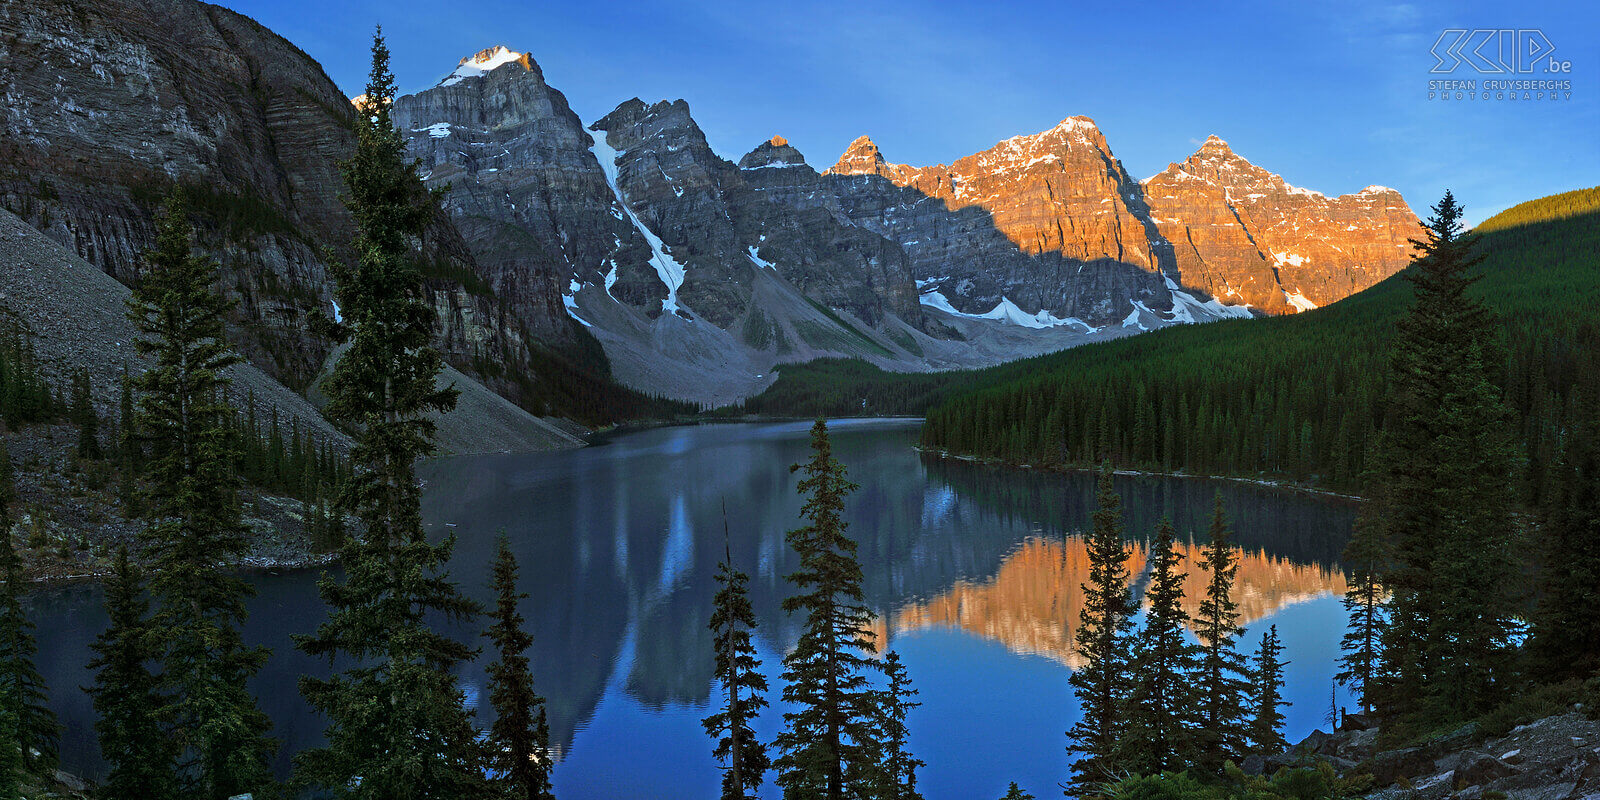 Banff NP - Lake Moraine - Sunrise The first sunlight in the morning results in a wonderful orange glow on the mountains behind the beautiful Lake Moraine. This lake is one of the iconic locations in Banff National Park in the Rocky Mountains in Canada. Stefan Cruysberghs